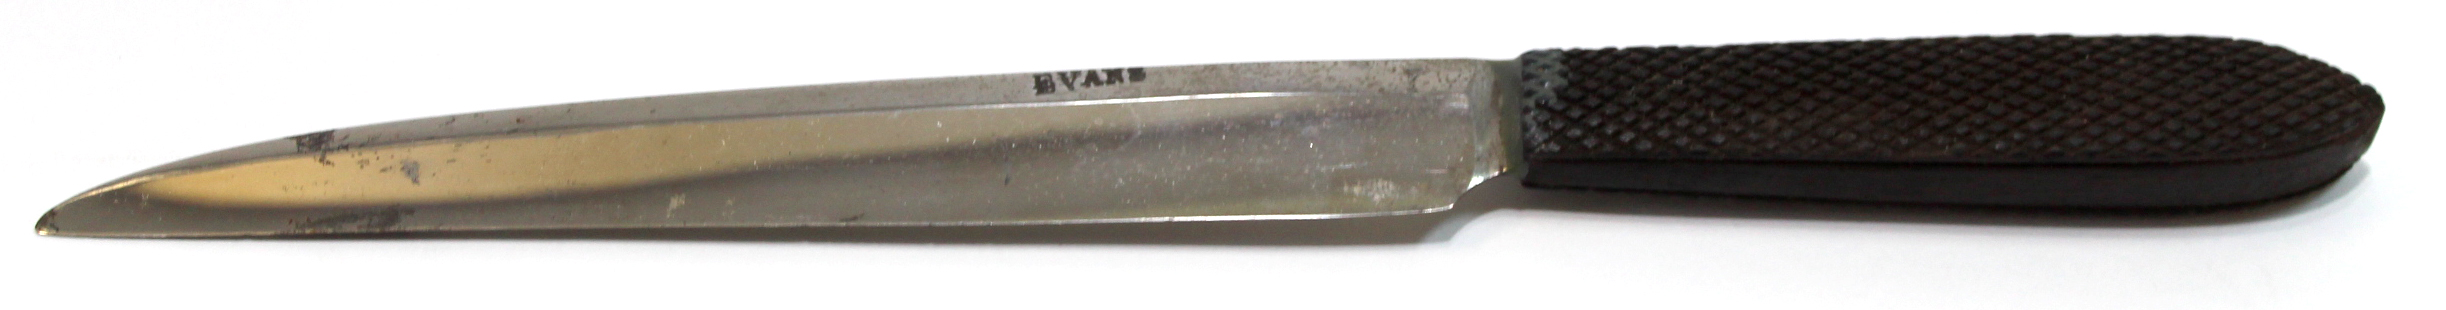 Knife with wooden handle, the blade marked Evans